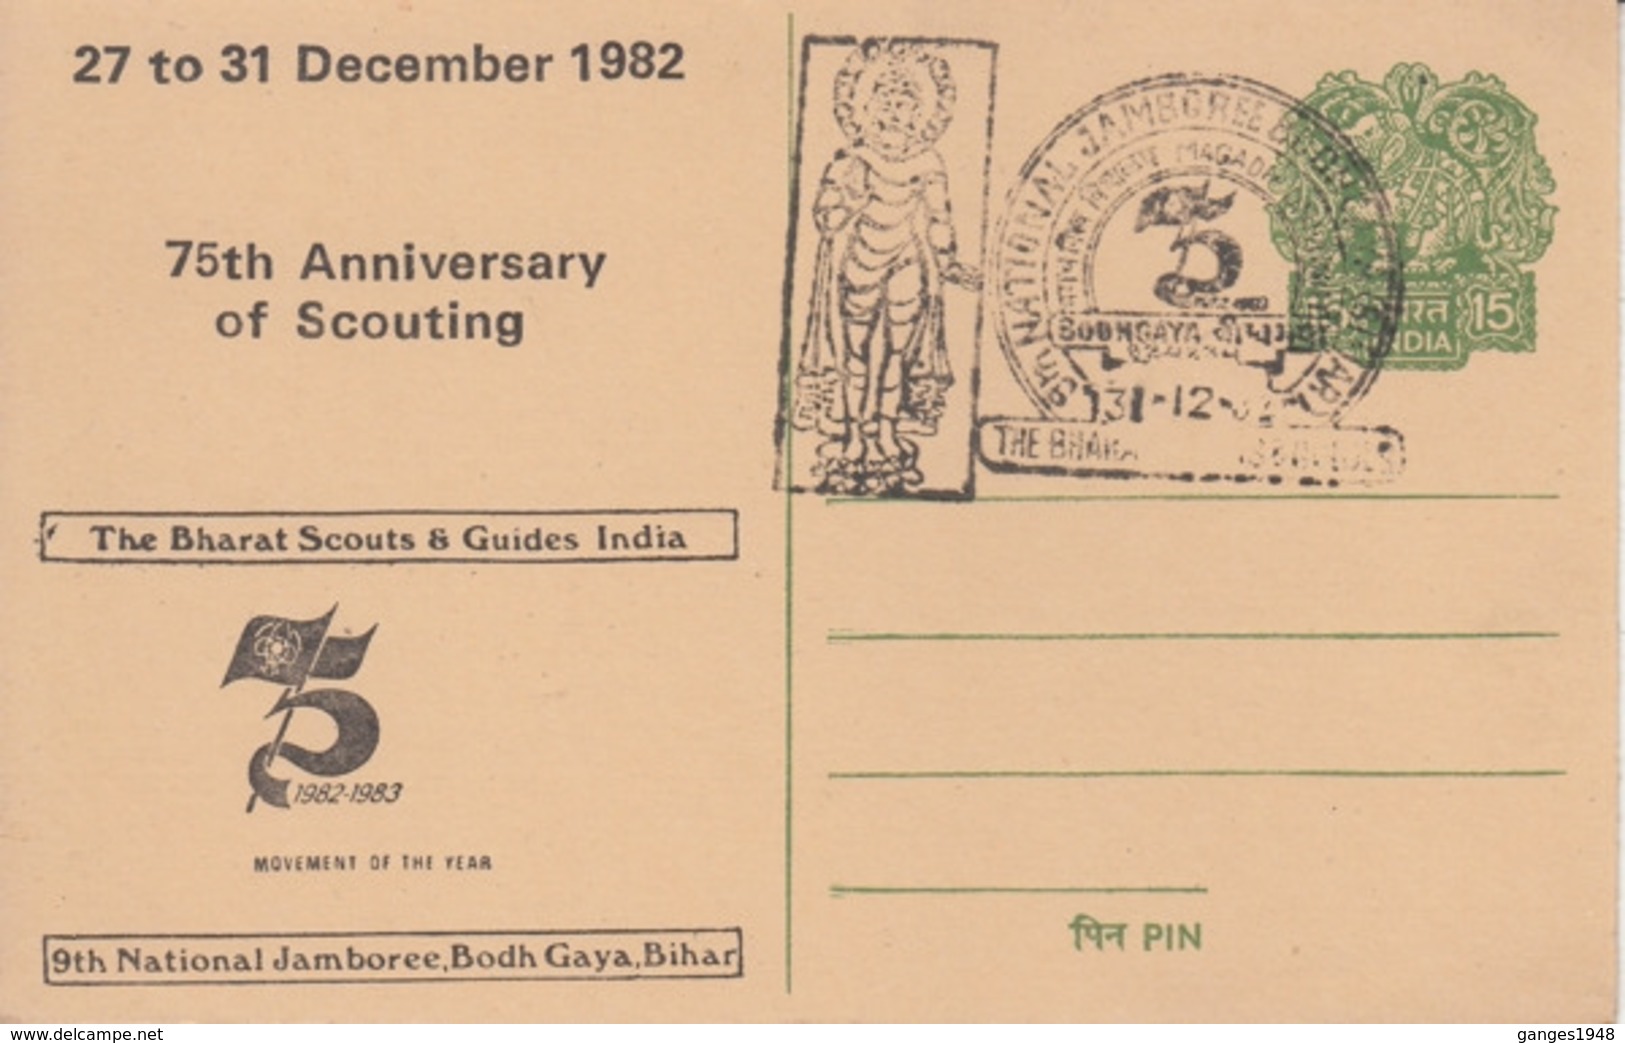 India  31.12 1982  Scouting  9th National Jumboree  Bodh Gaya  Special Postcard  #   22308  D - Covers & Documents